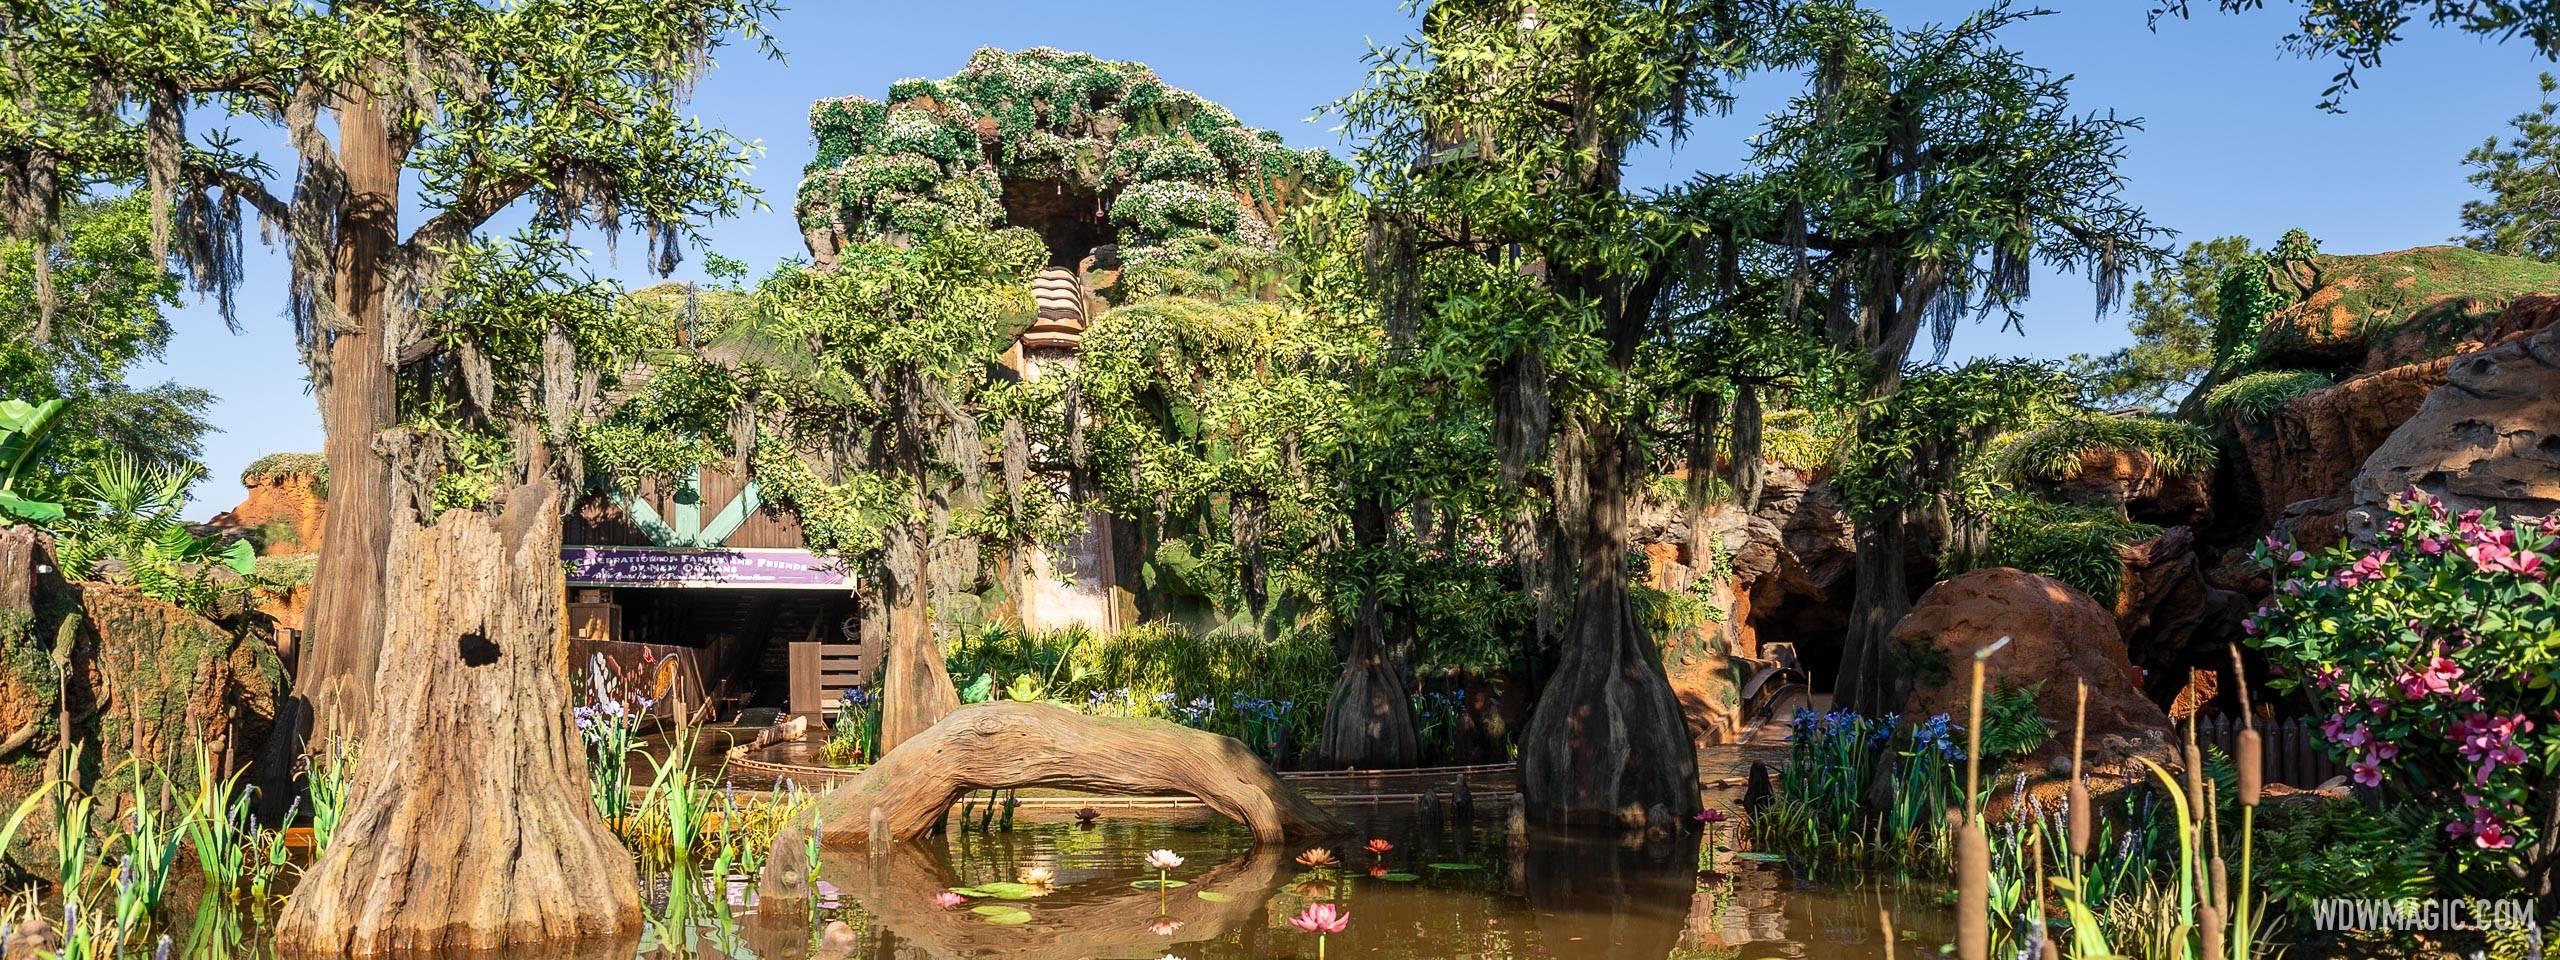 Detailed Look at Tiana's Bayou Adventure As Construction Walls Come Down and Opening Nears